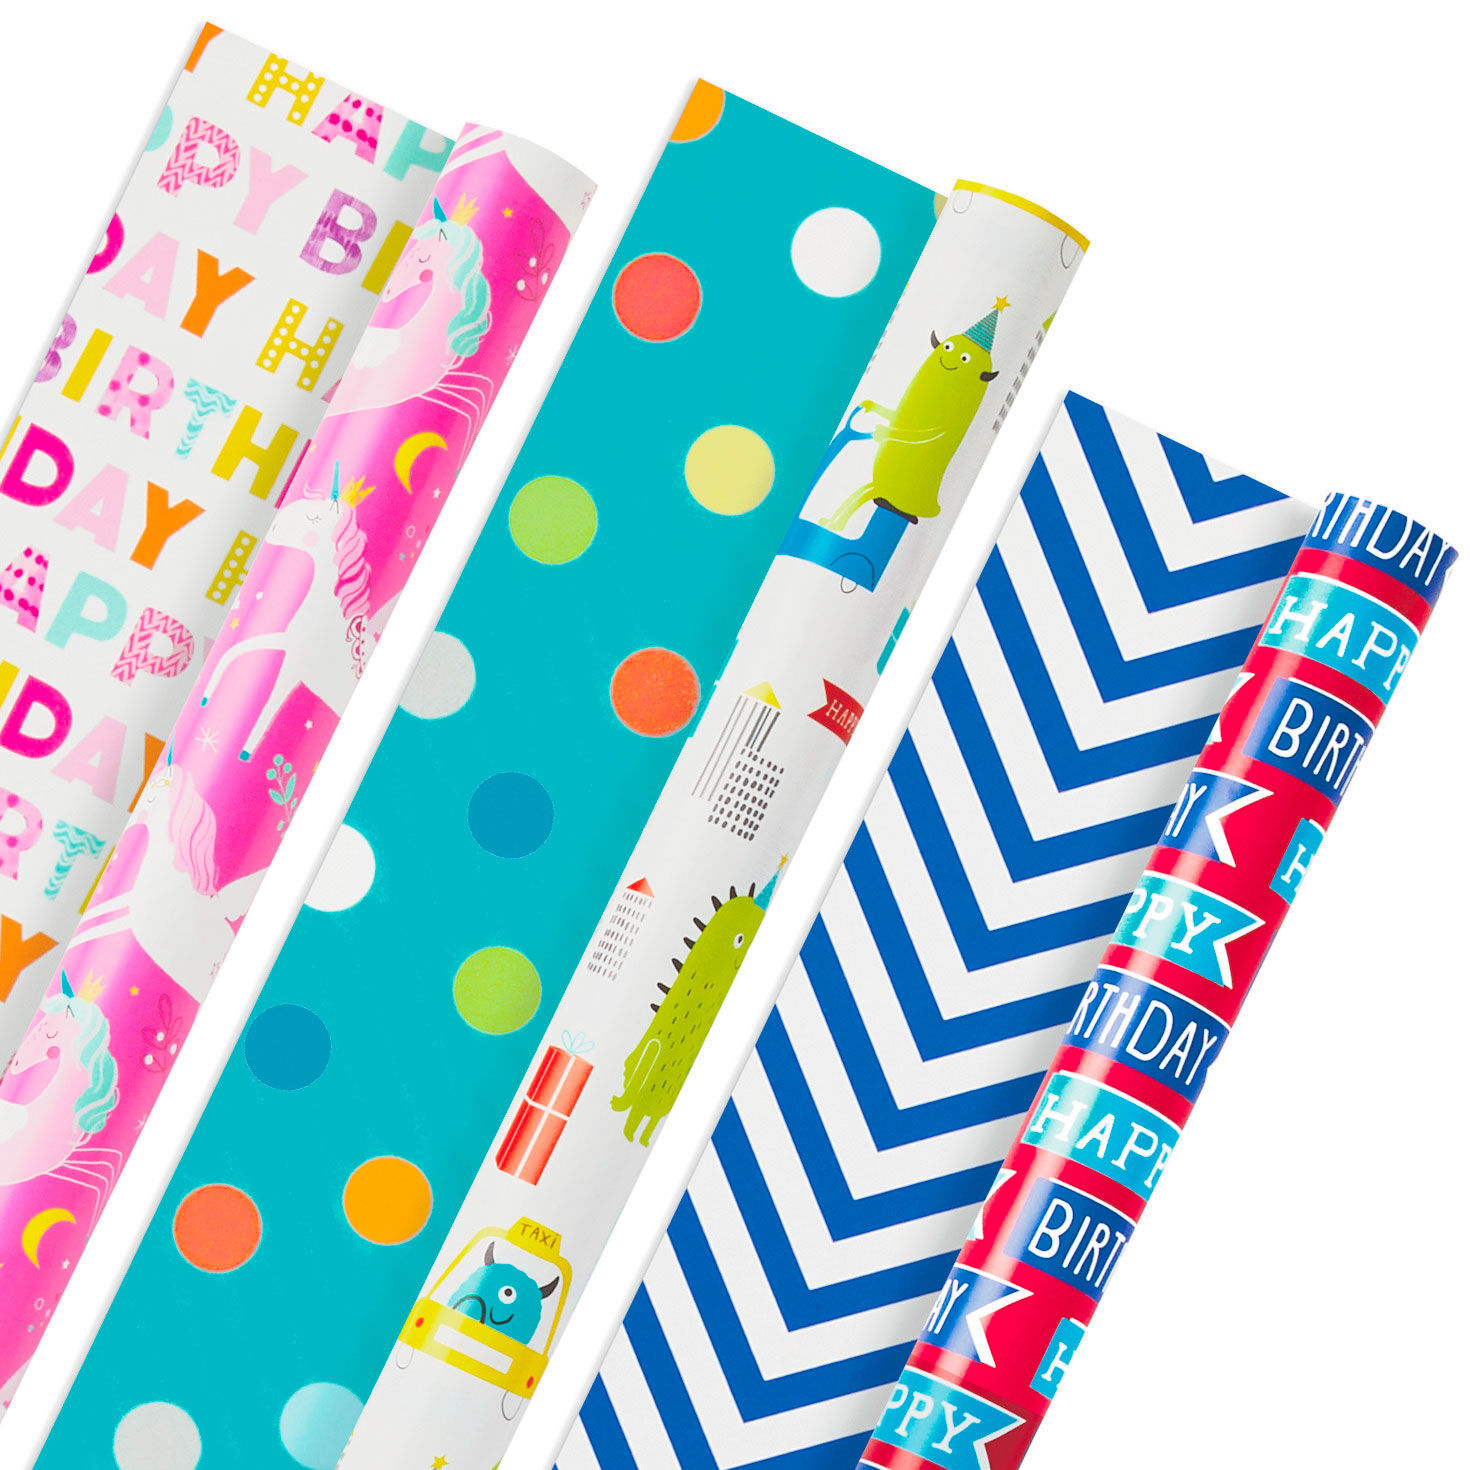 Birthday Wrapping Paper Roll - Happy Birthday Lettering and Gift